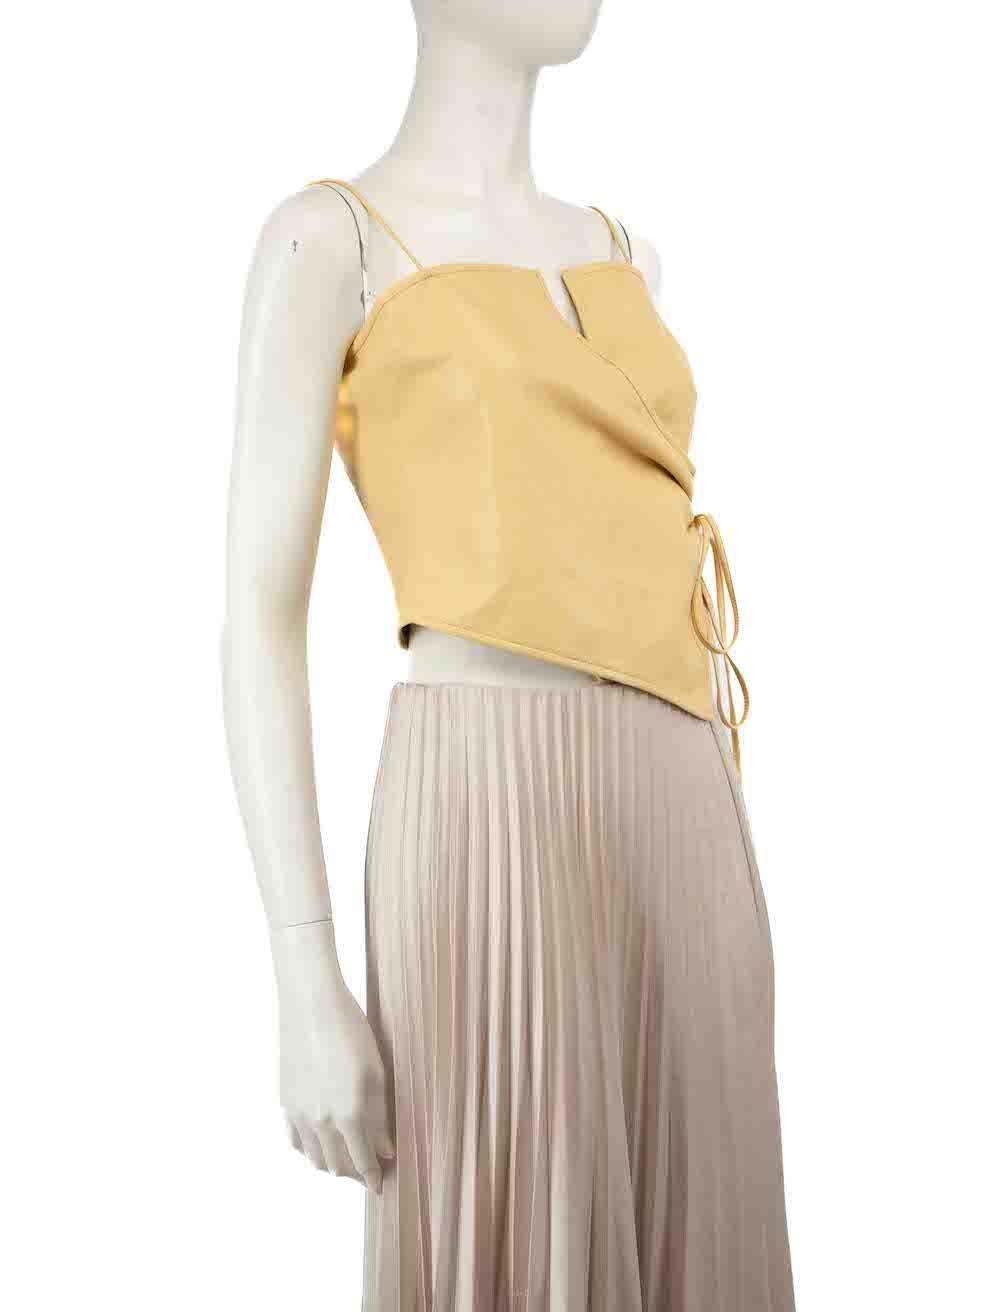 CONDITION is Good. Minor wear to top is evident. Light wear to the leather surface with some small spots of light discolouration seen at the left side of the back on this used NANUSHKA designer resale item.
 
 
 
 Details
 
 
 Yellow
 
 Leather
 
